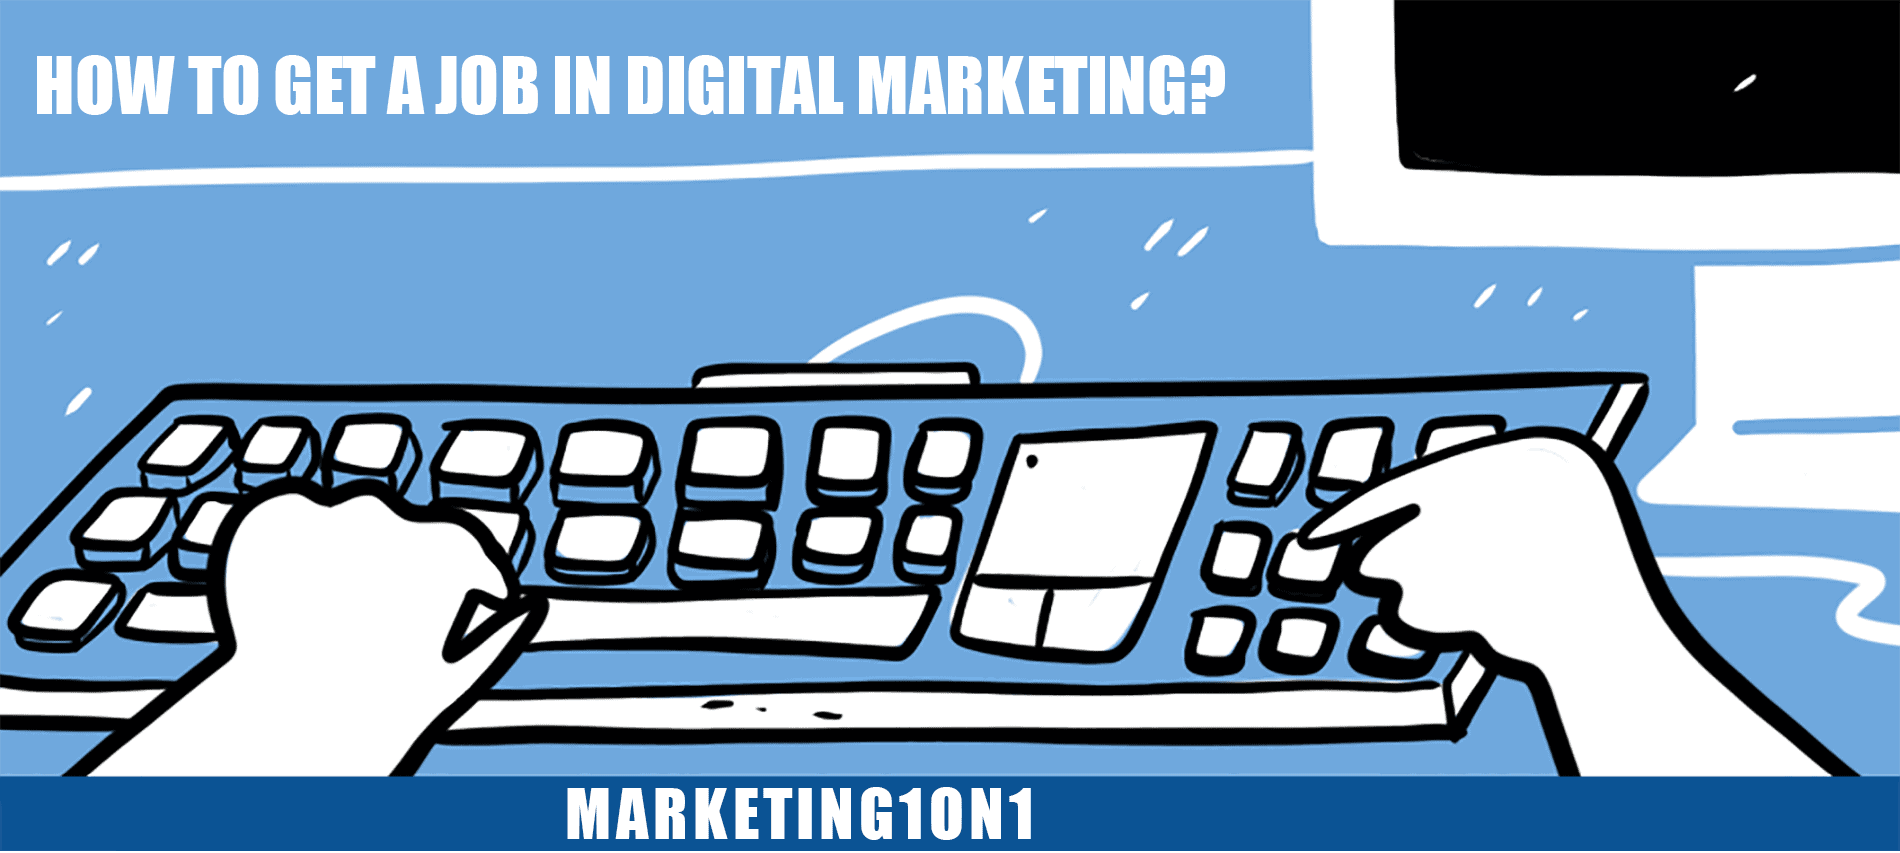 How to get a job in digital marketing?